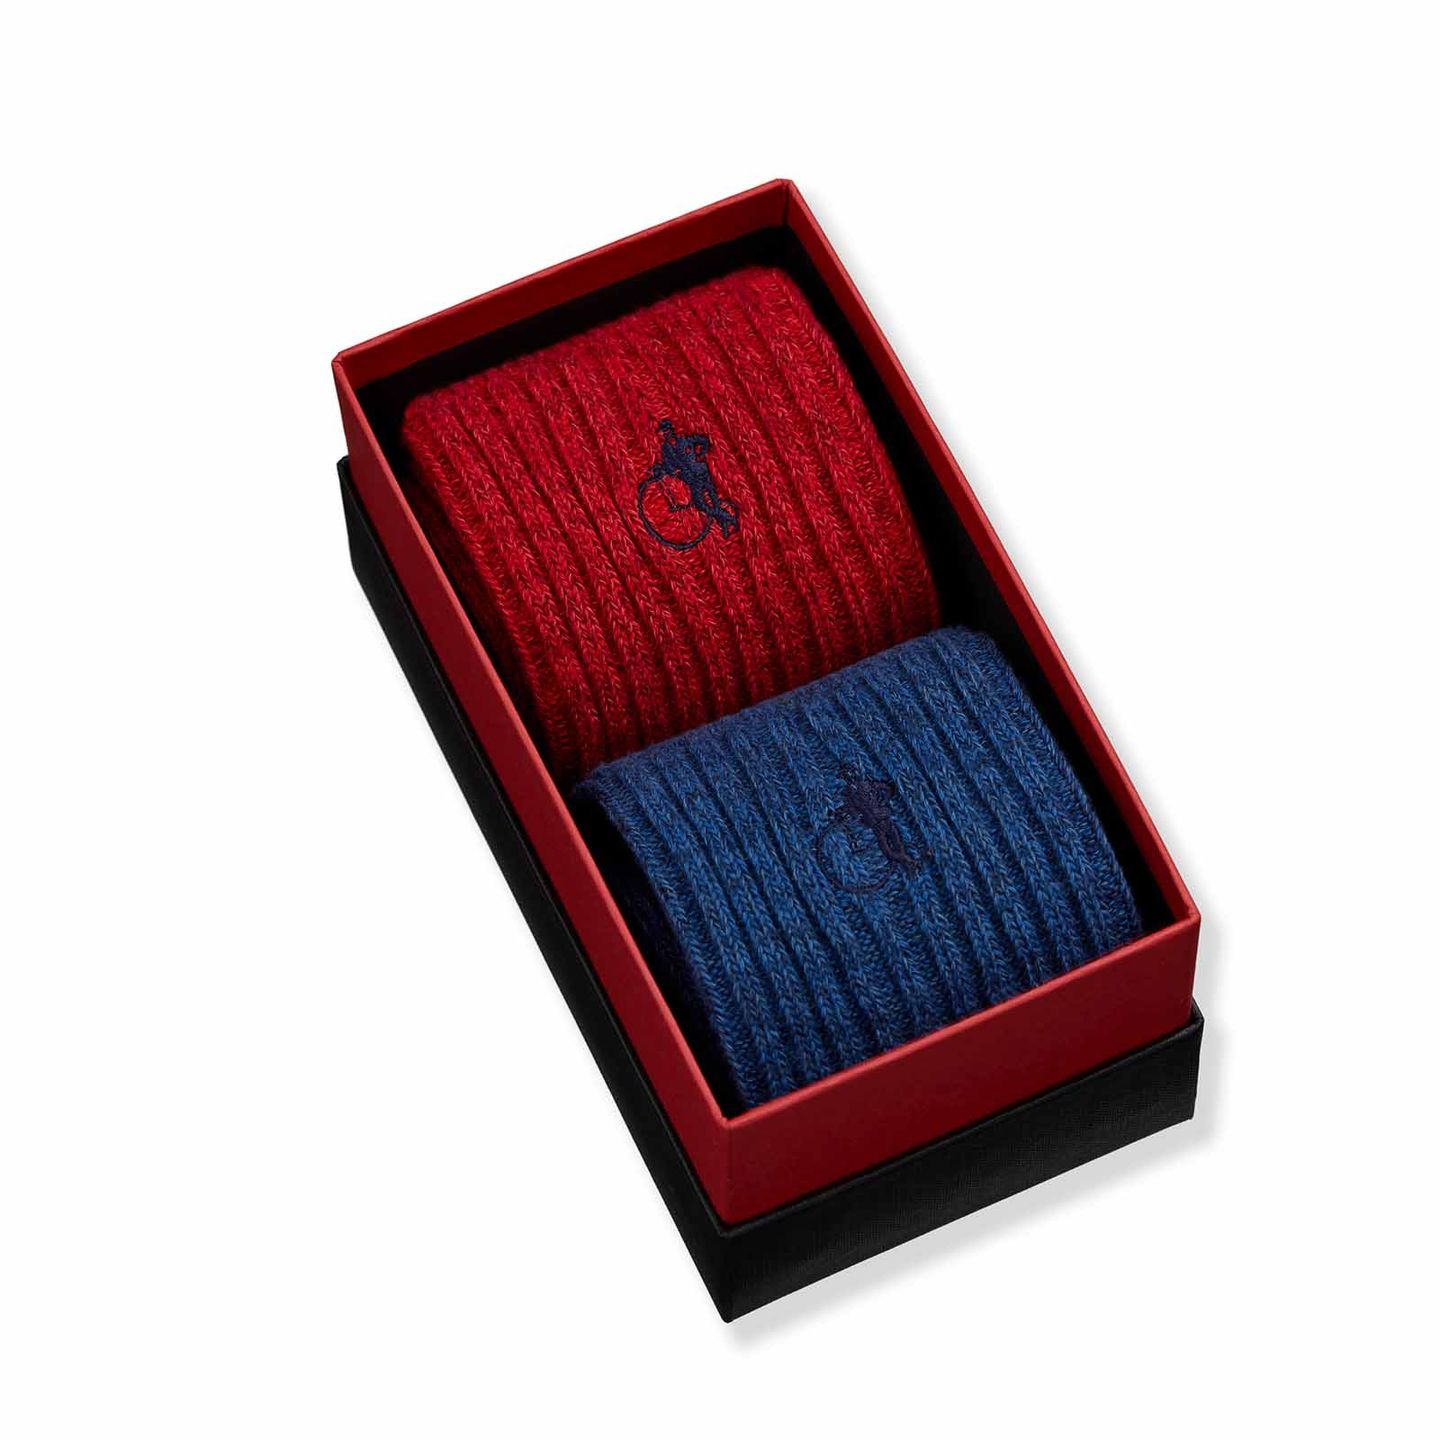 2 pairs of mens boot socks in red and blue